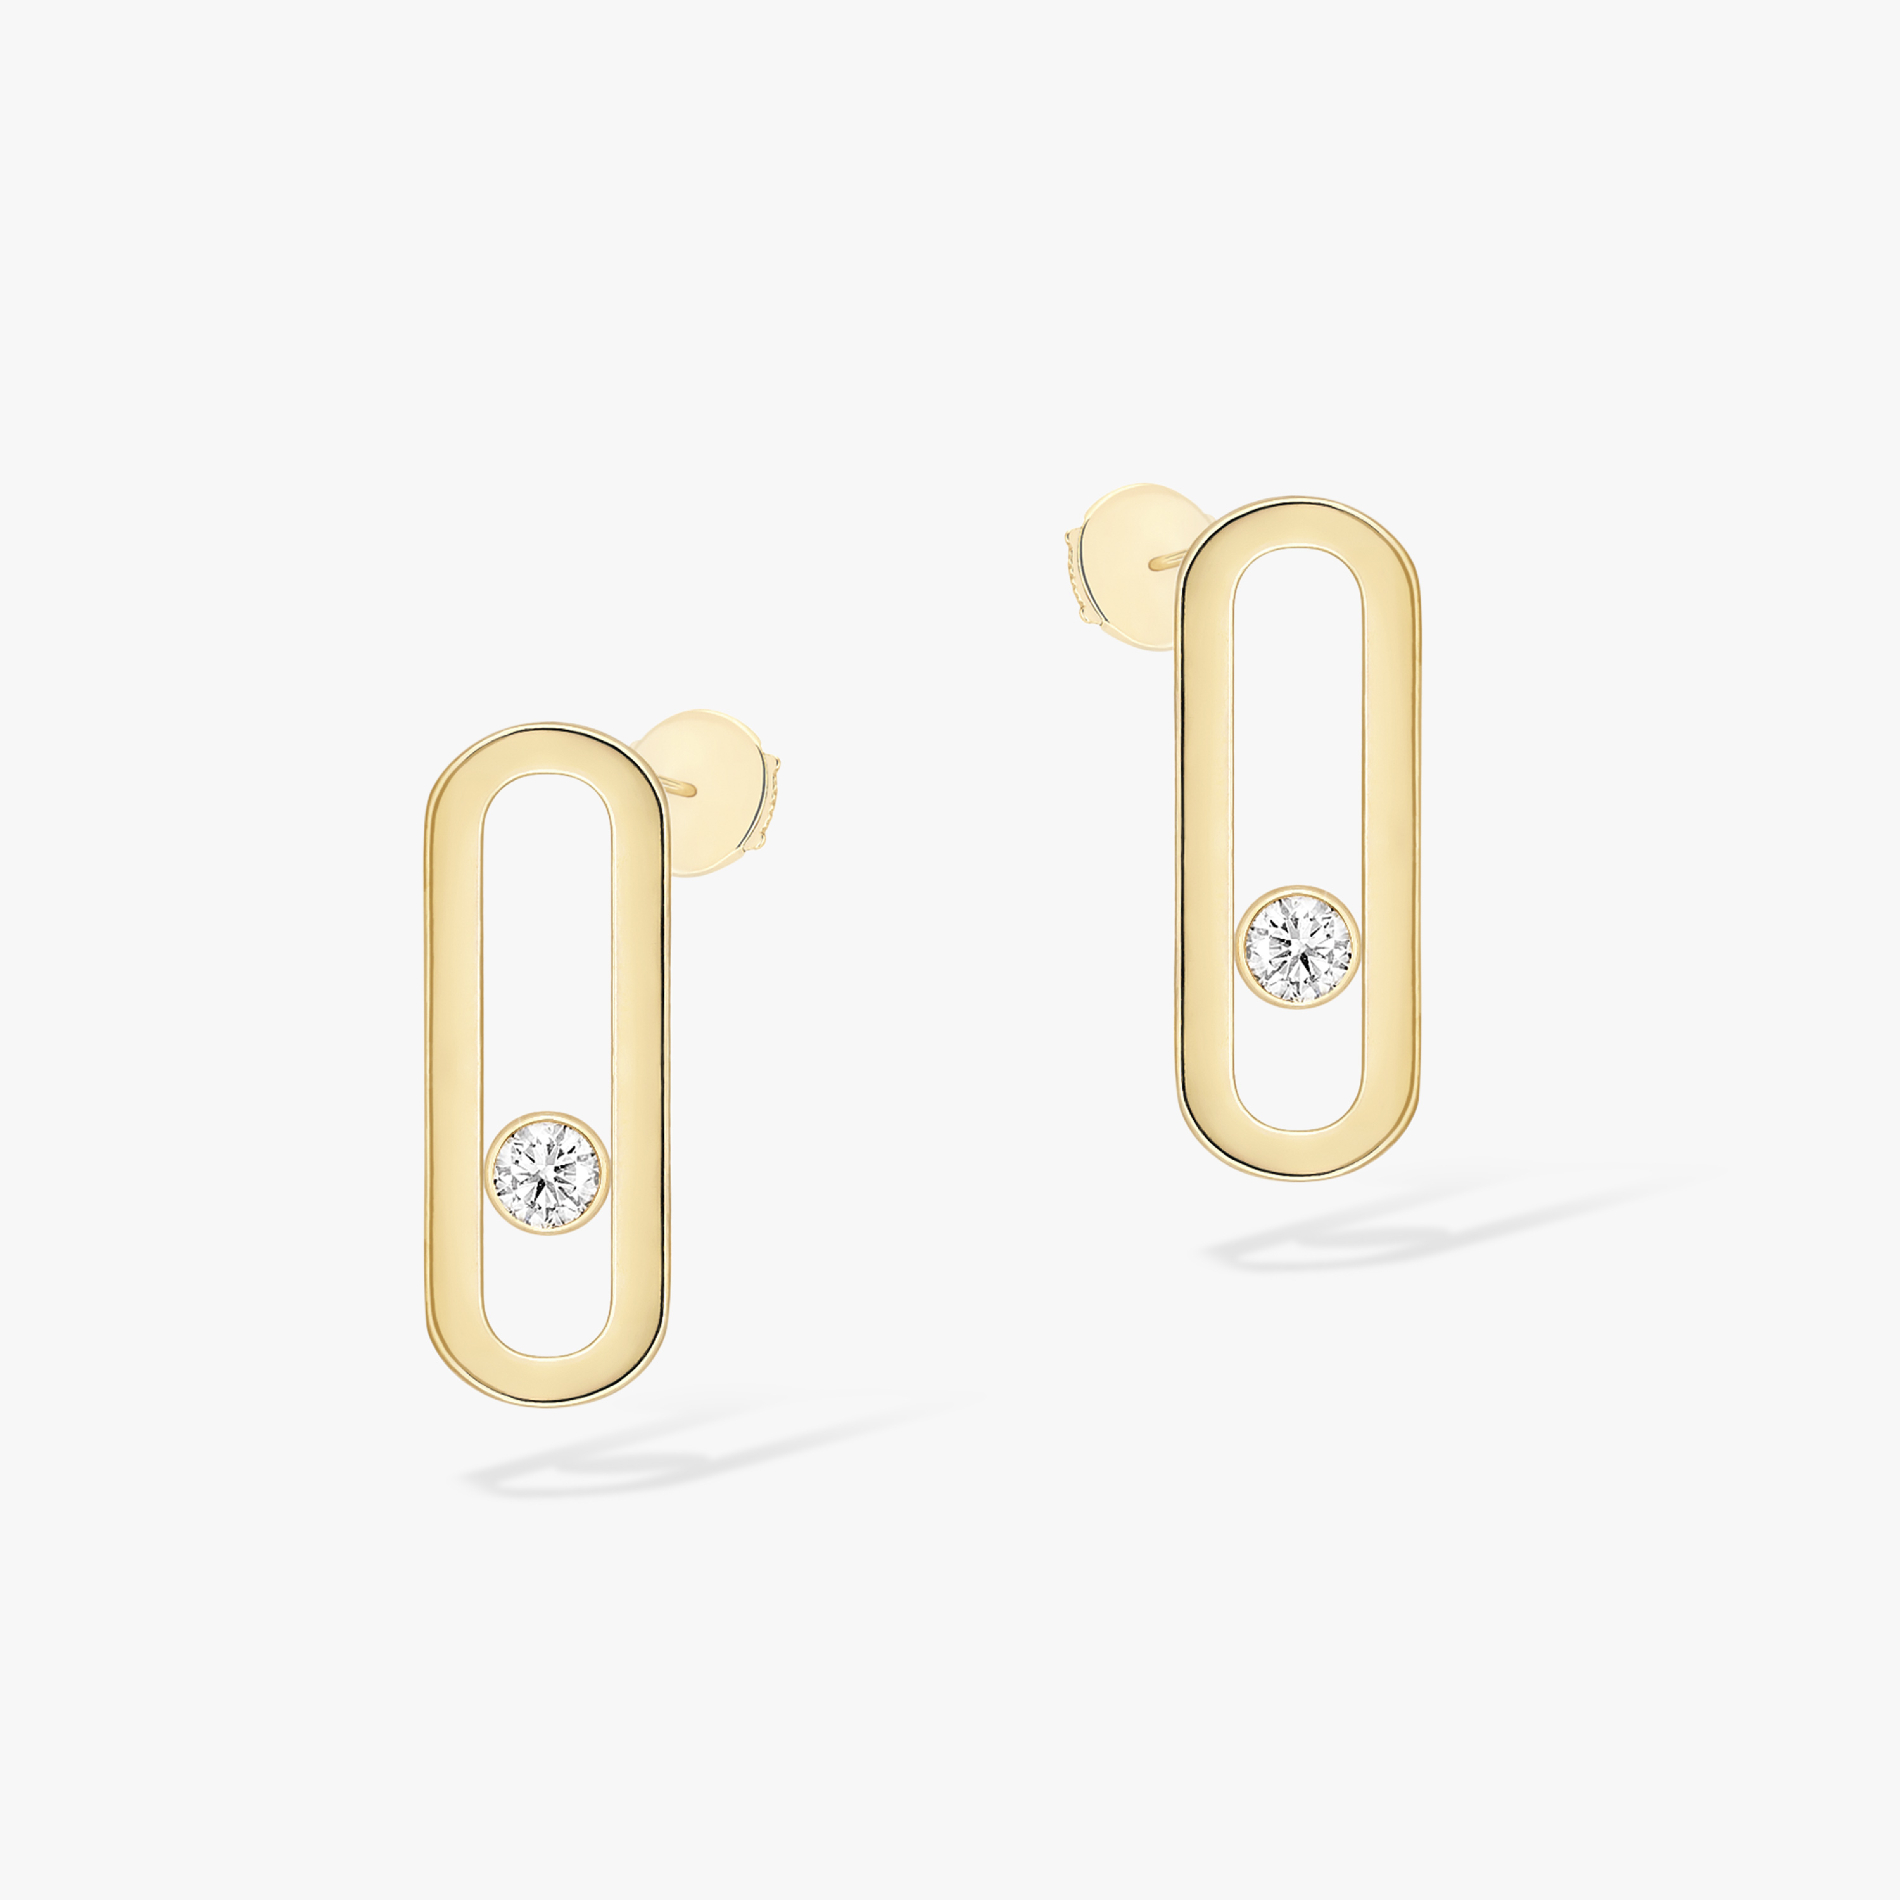 Move Uno Yellow Gold For Her Diamond Earrings 12182-YG